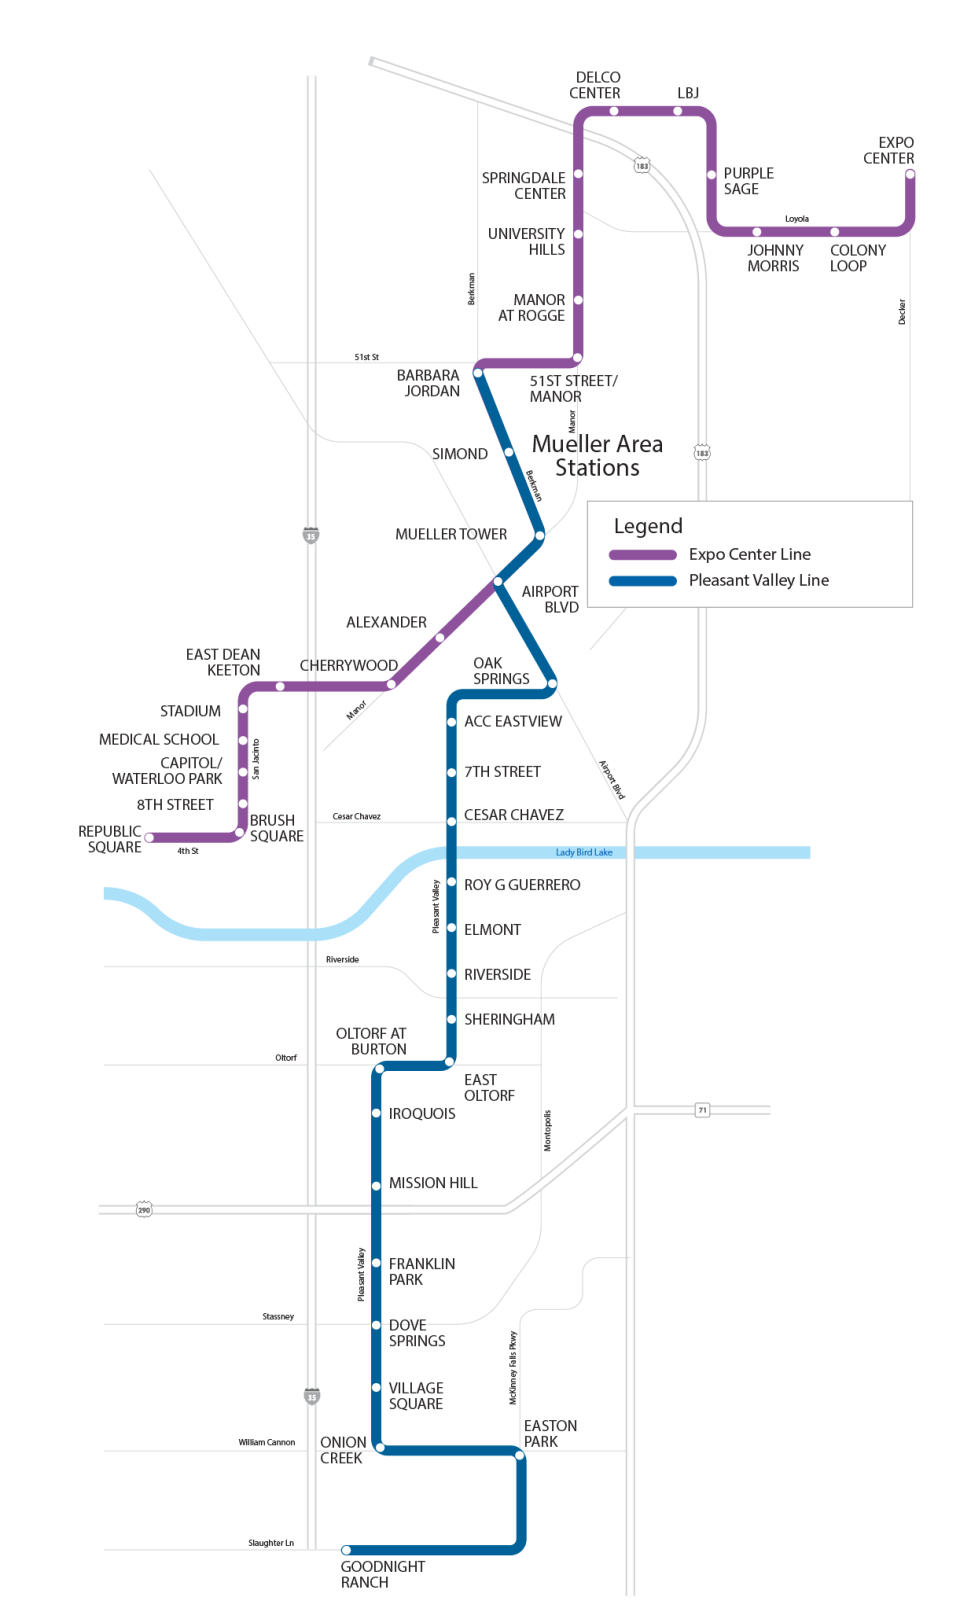 A map shows two proposed high frequency bus lines in East Austin — the Pleasant Valley MetroRapid and Expo Center MetroRapid — slated to come online 2025.